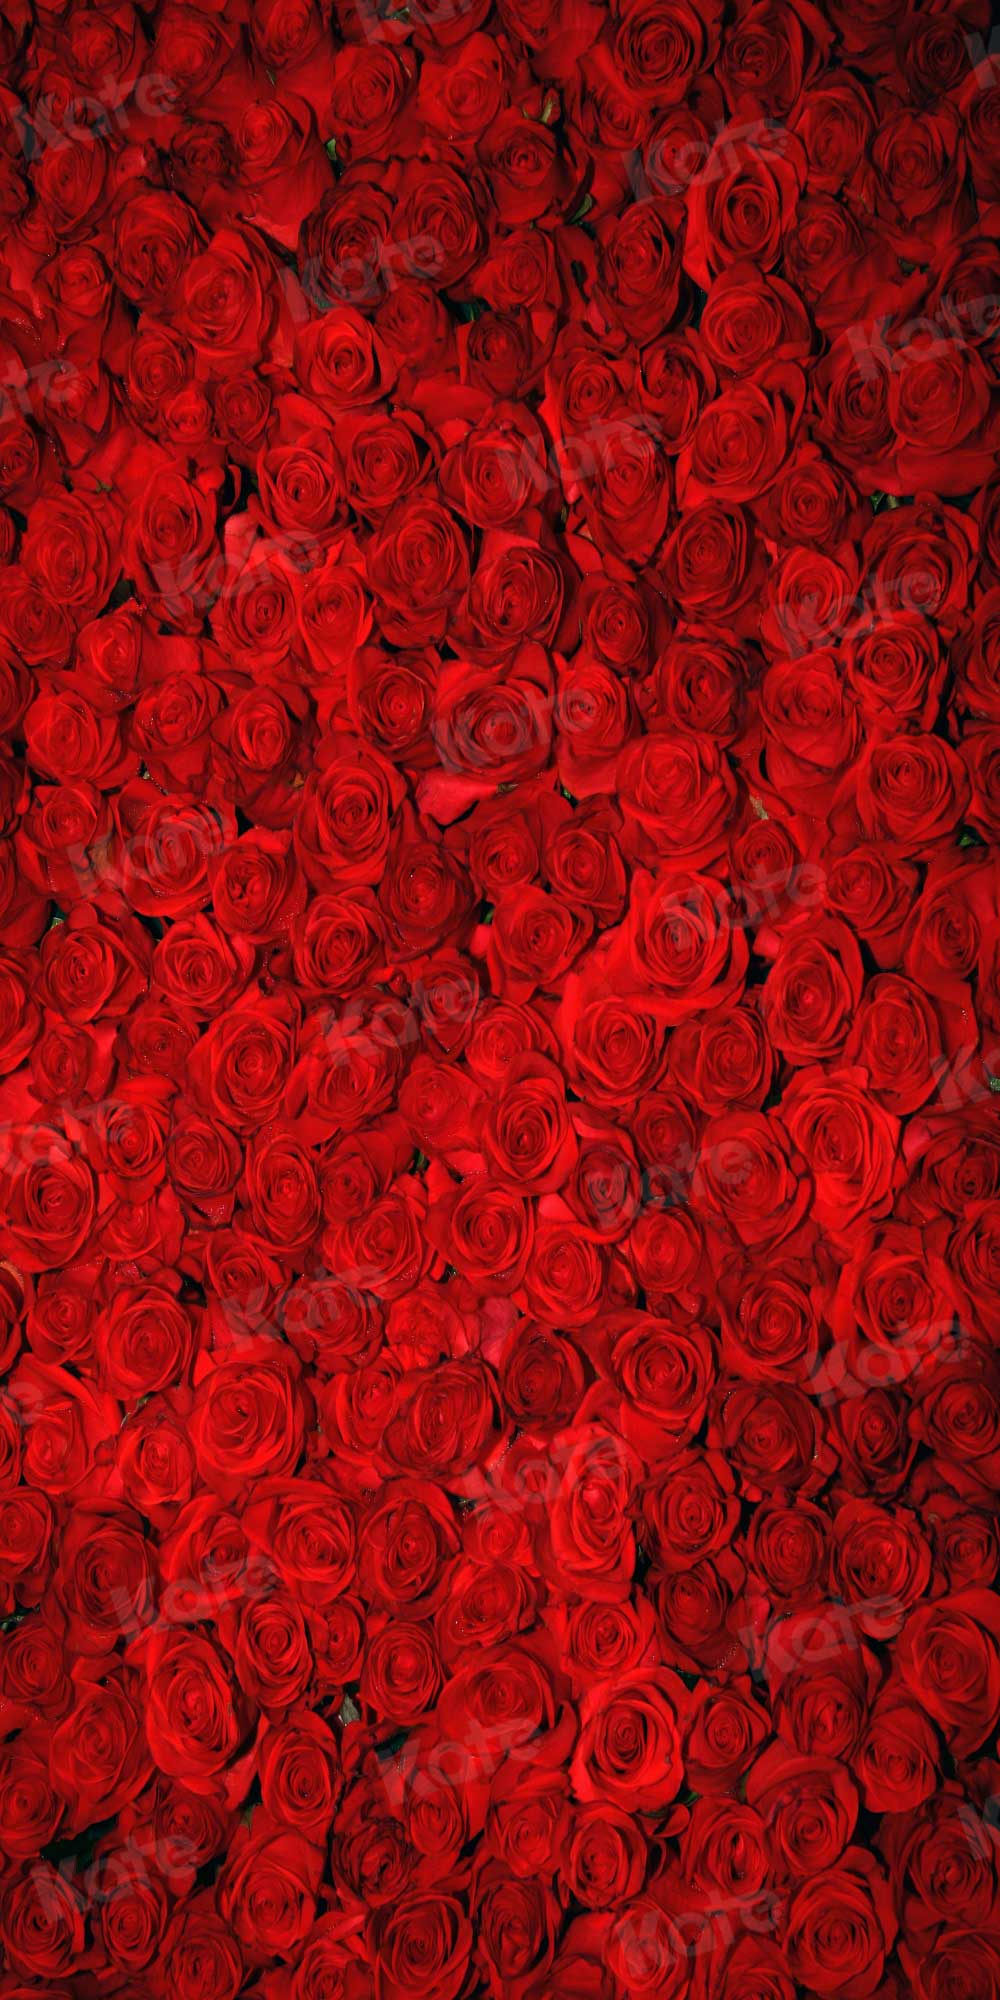 Kate Red Roses Explosion Floral Photography Backgrounds